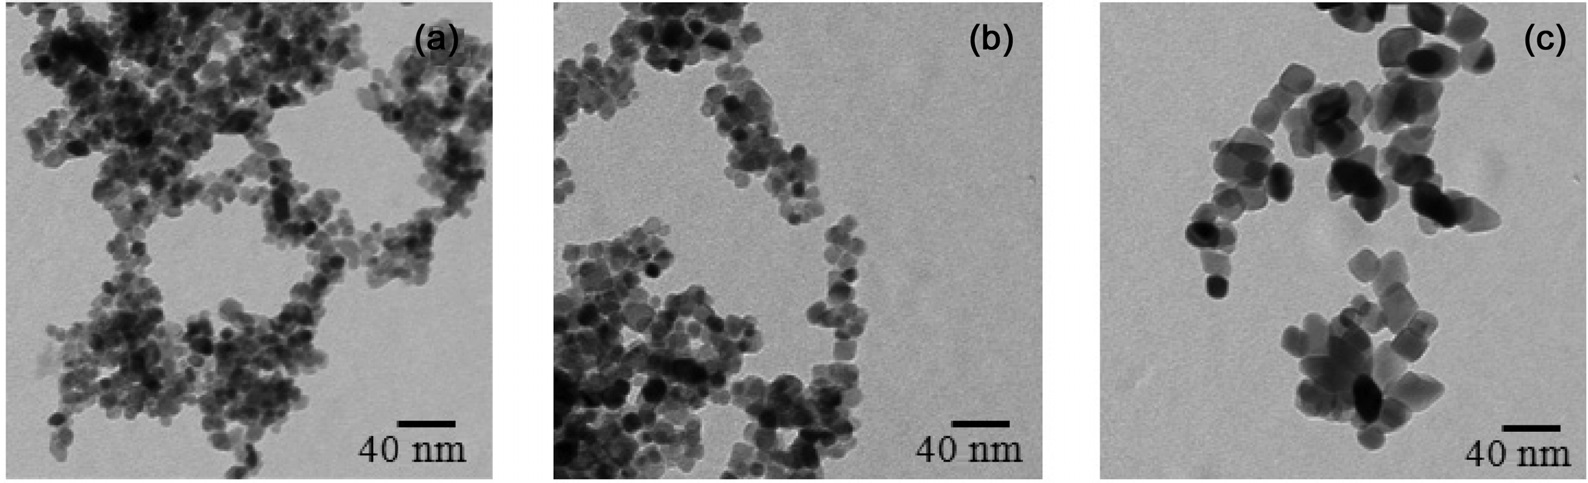 The TEM images of TiO2 particles obtained using solvothermal method at different pHs, (a) pH = 3, (b) pH = 7, (c) pH = 11.